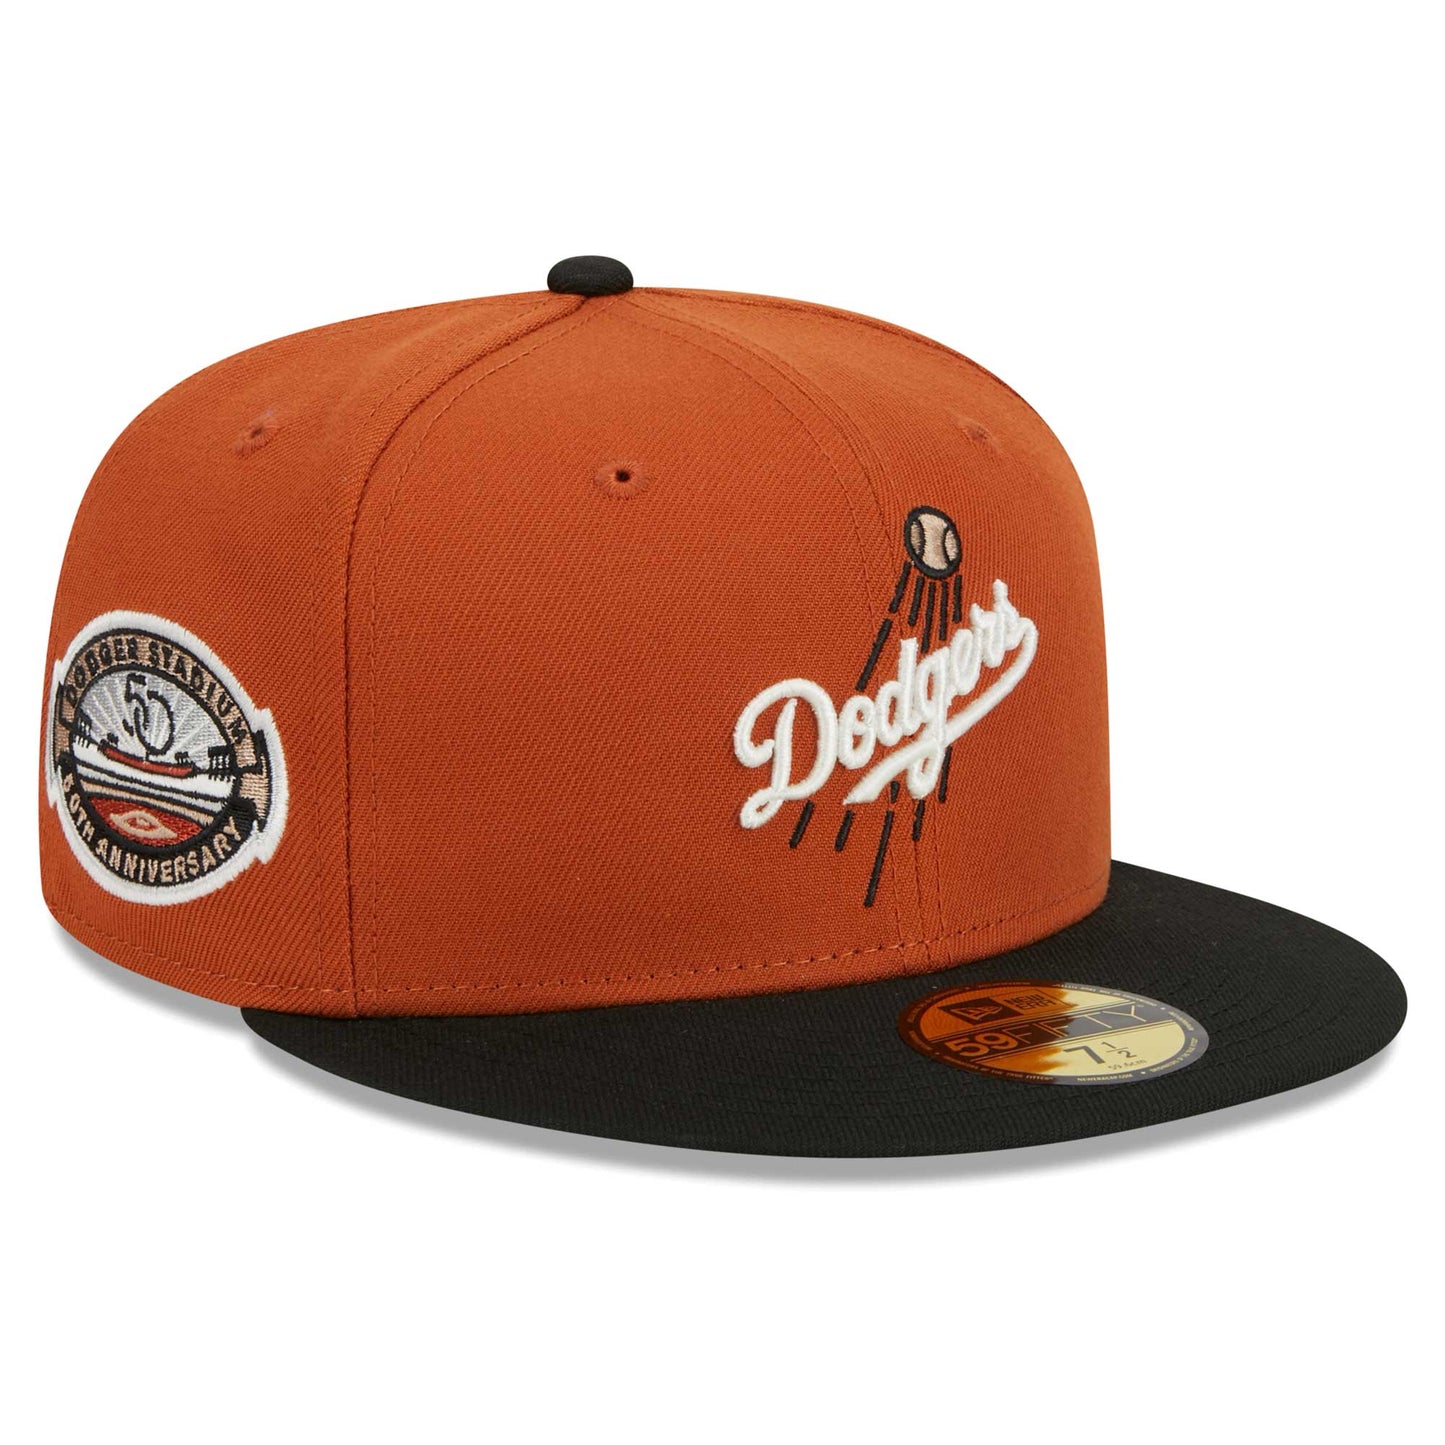 Los Angeles Dodgers New Era 59FIFTY Fitted Hat - Orange/Black